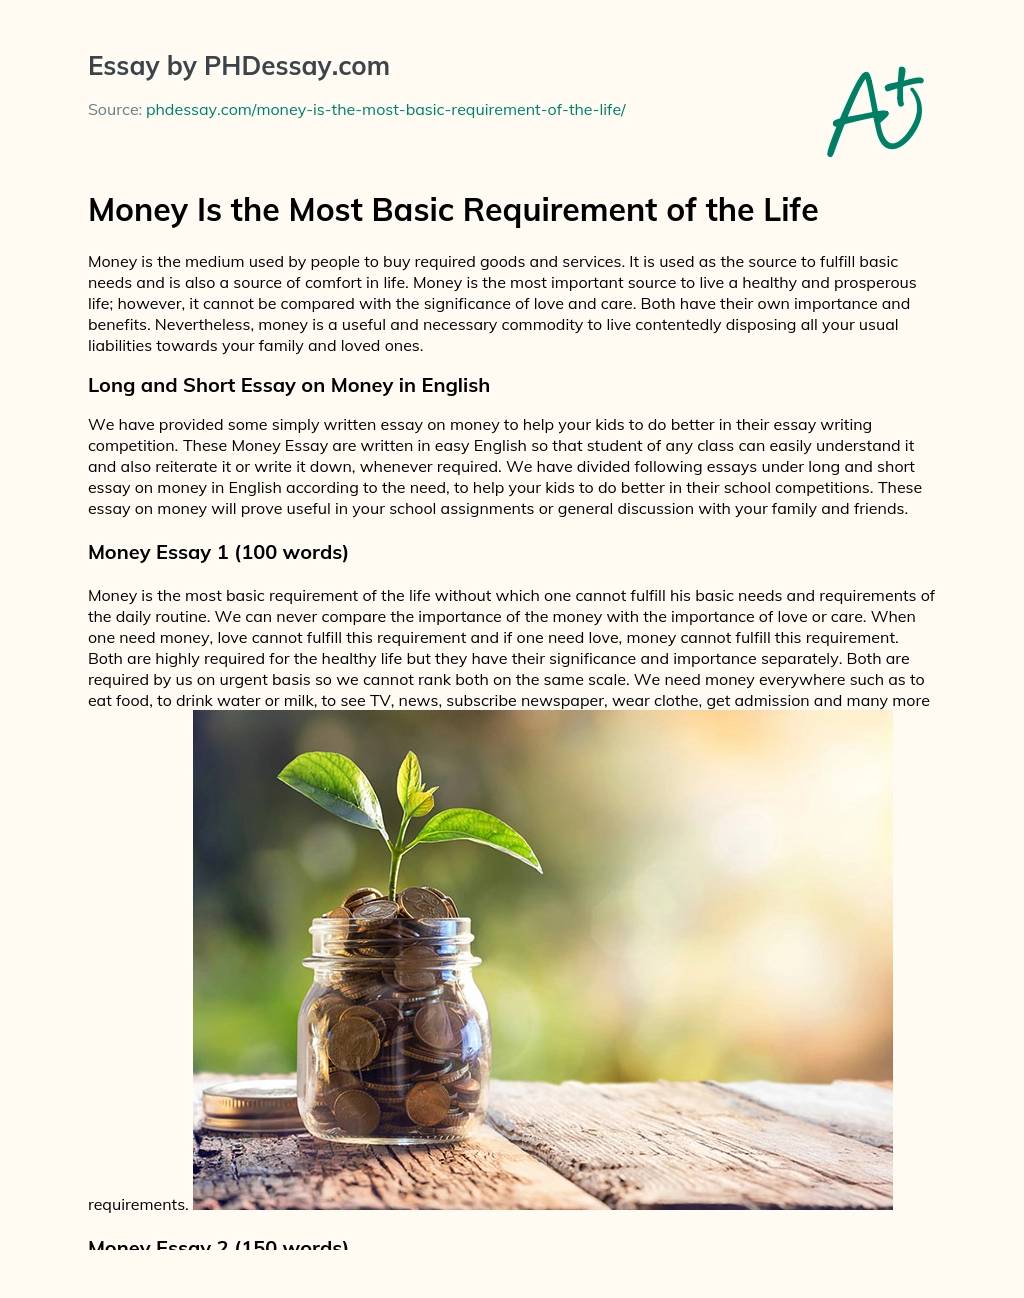 Money Is the Most Basic Requirement of the Life essay